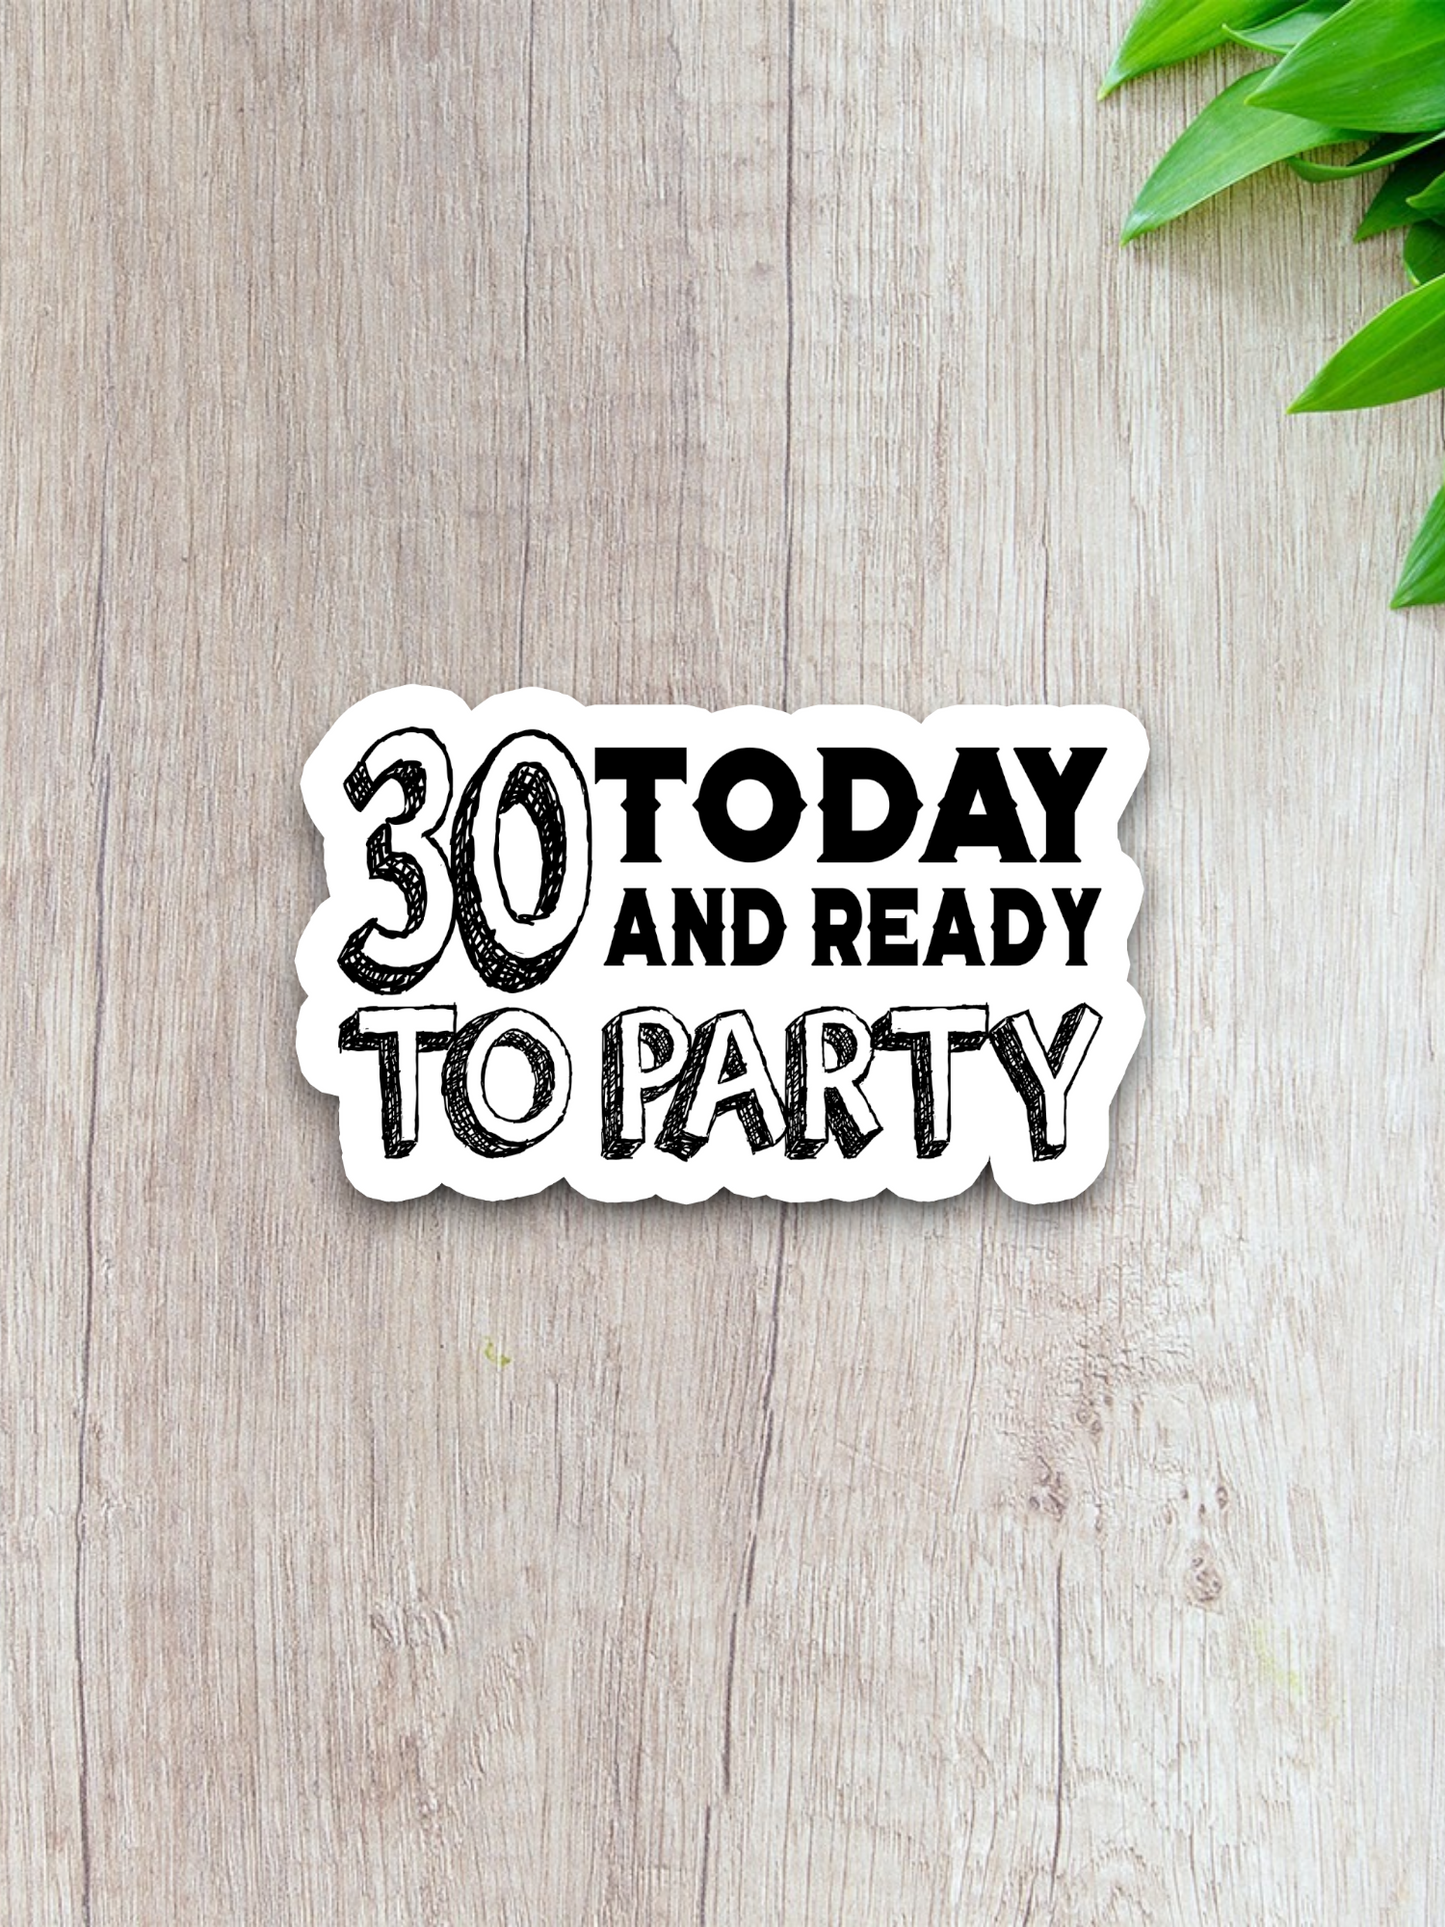 30 Today and Ready to Party Sticker